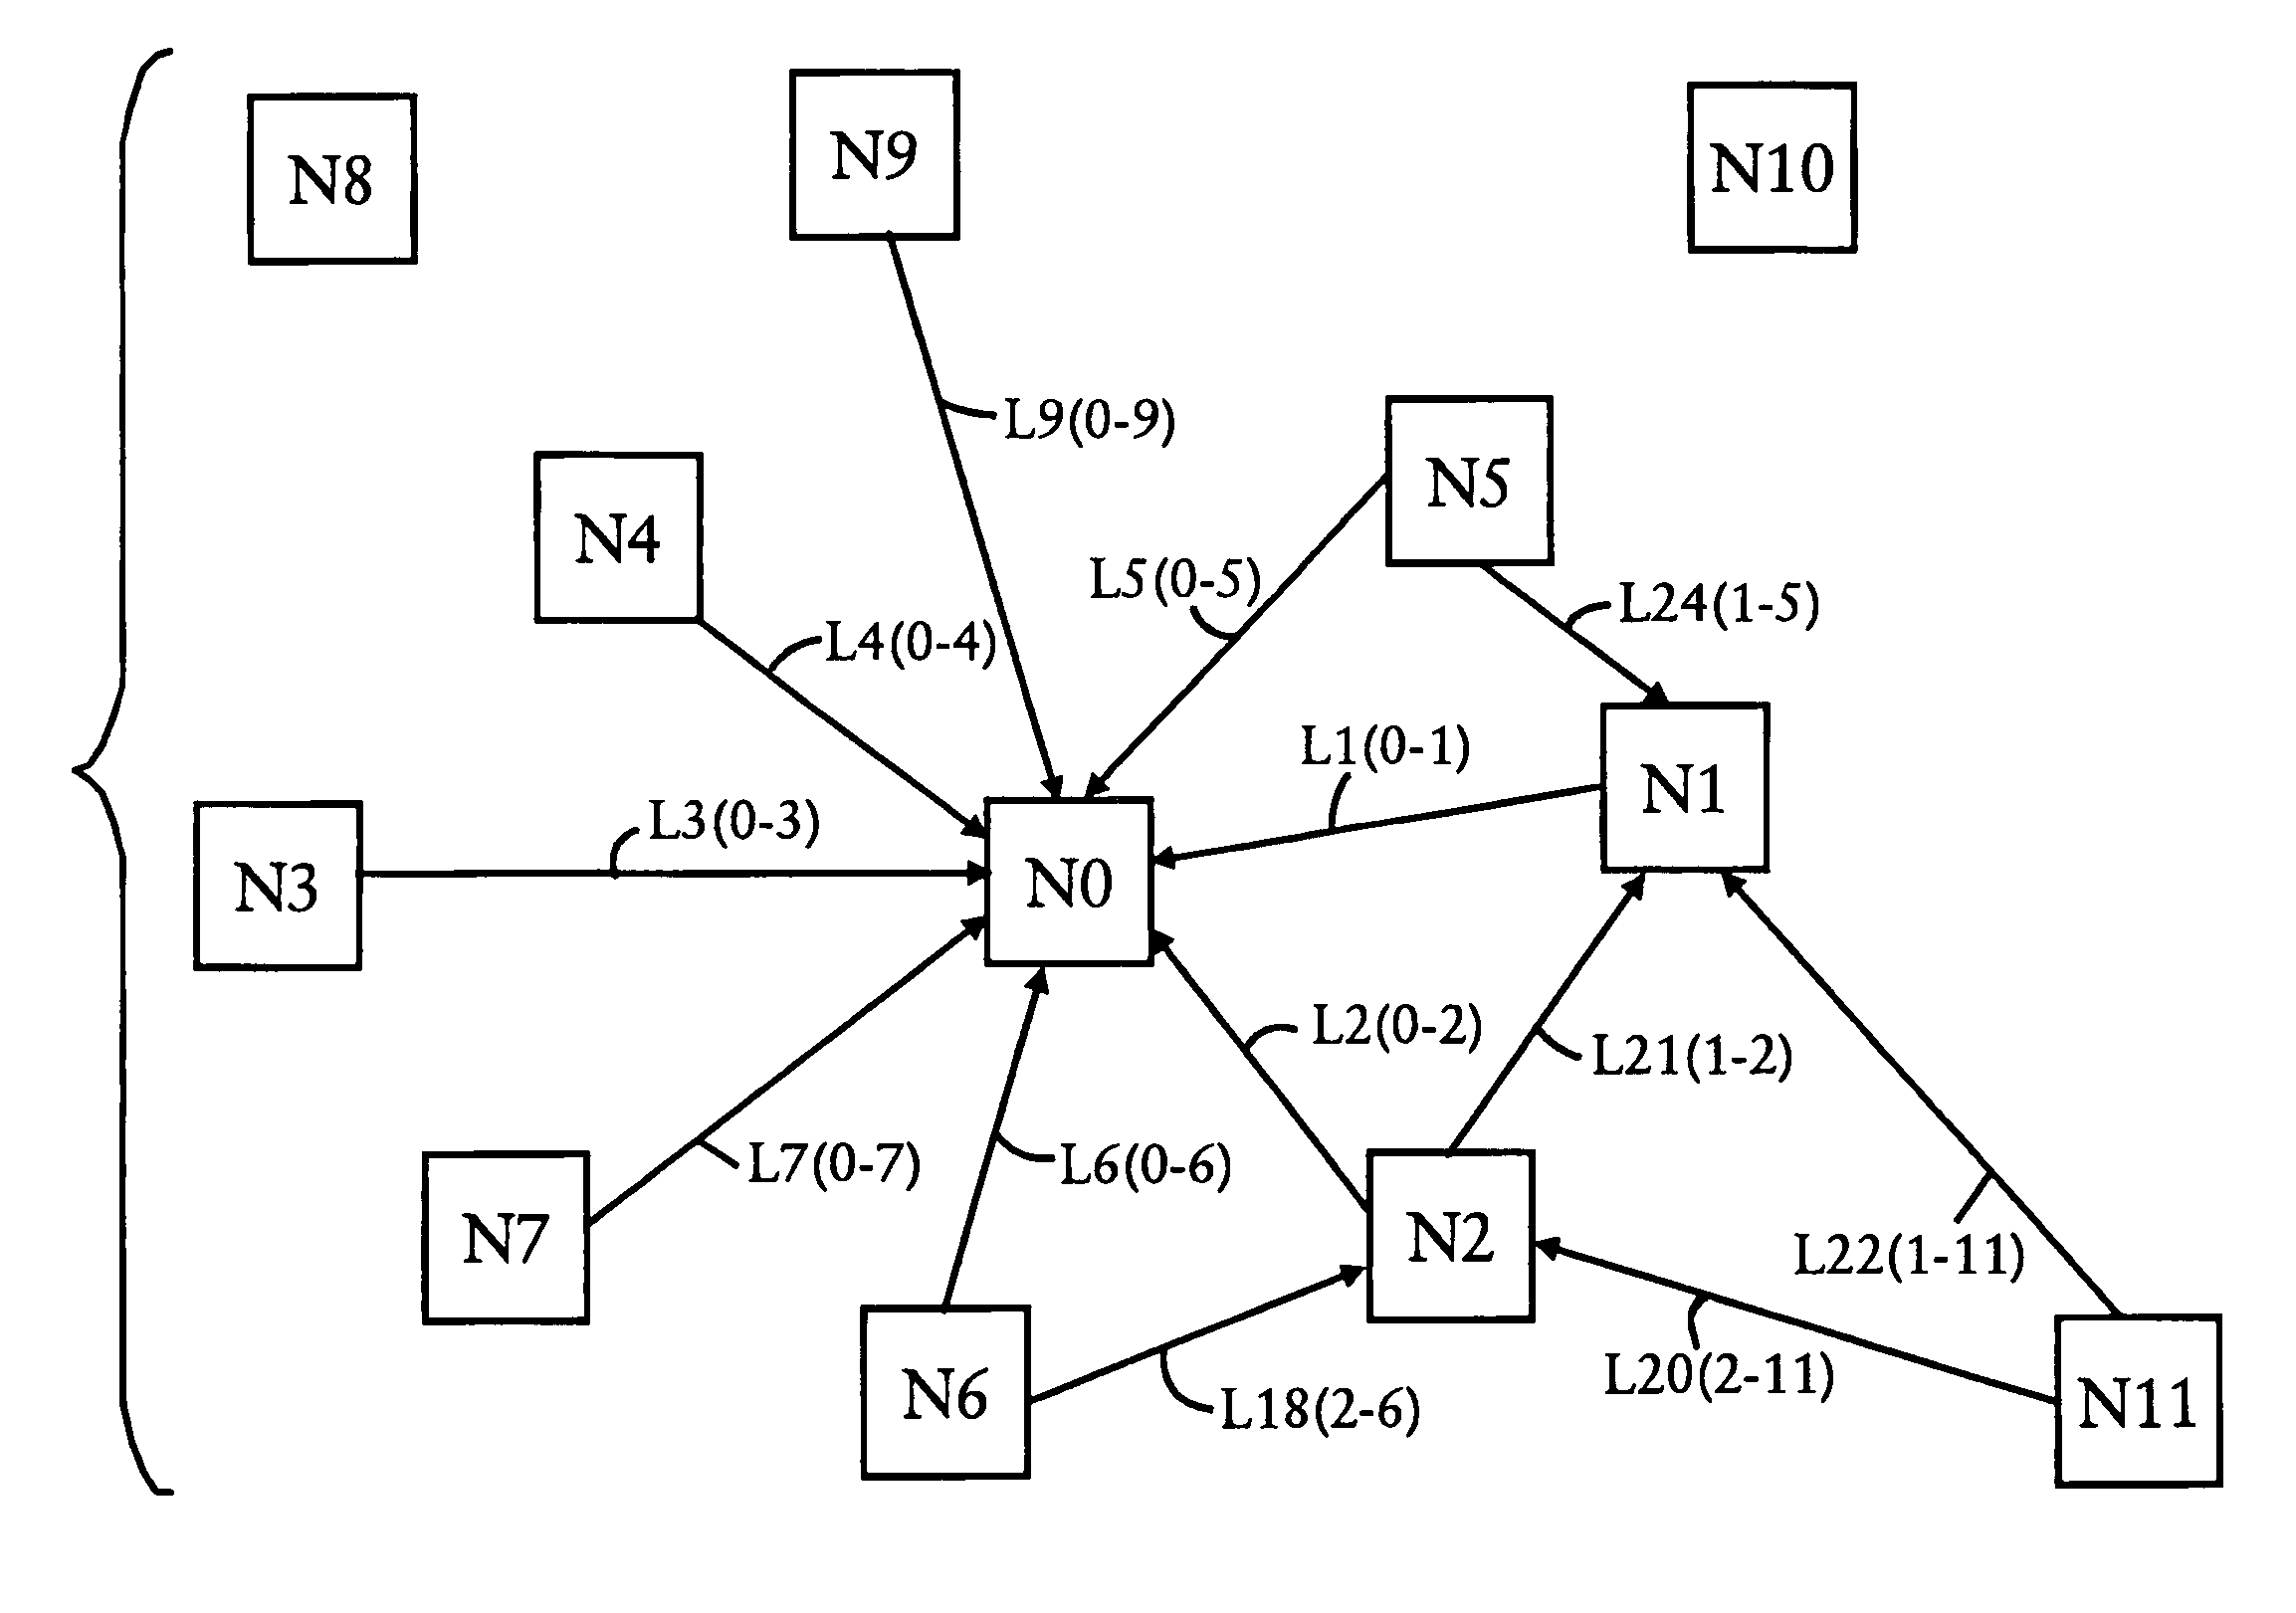 Directed acyclic graph computation by orienting shortest path links and alternate path links obtained from shortest path computation